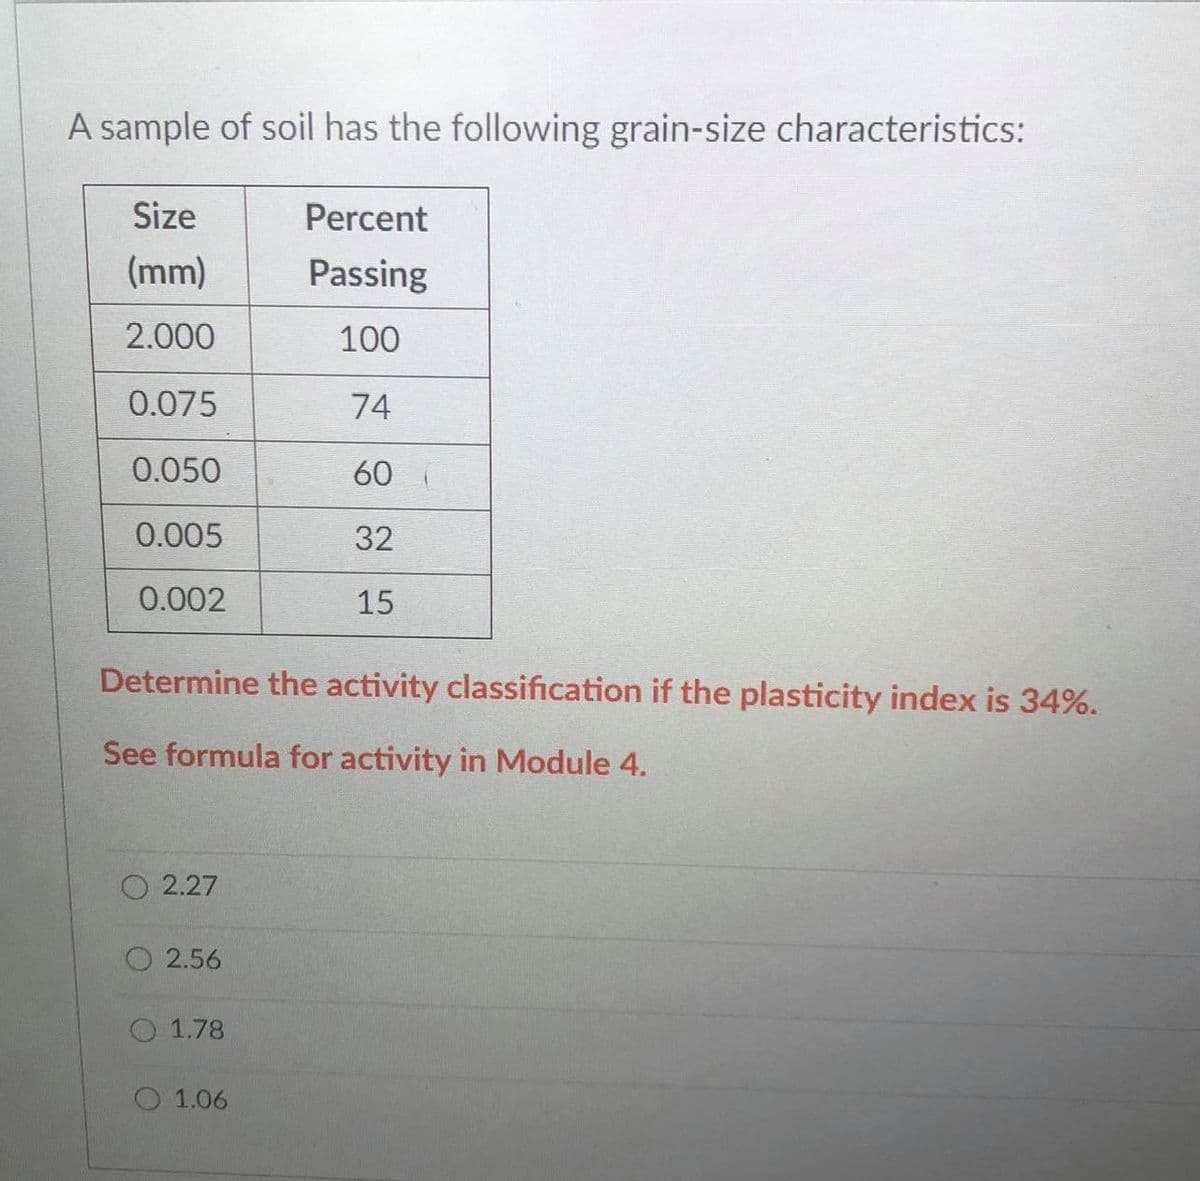 A sample of soil has the following grain-size characteristics:
Size
Percent
(mm)
Passing
2.000
100
0.075
74
0.050
60
0.005
32
0.002
15
Determine the activity classification if the plasticity index is 34%.
See formula for activity in Module 4.
O 2.27
O 2.56
O 1.78
O 1.06
